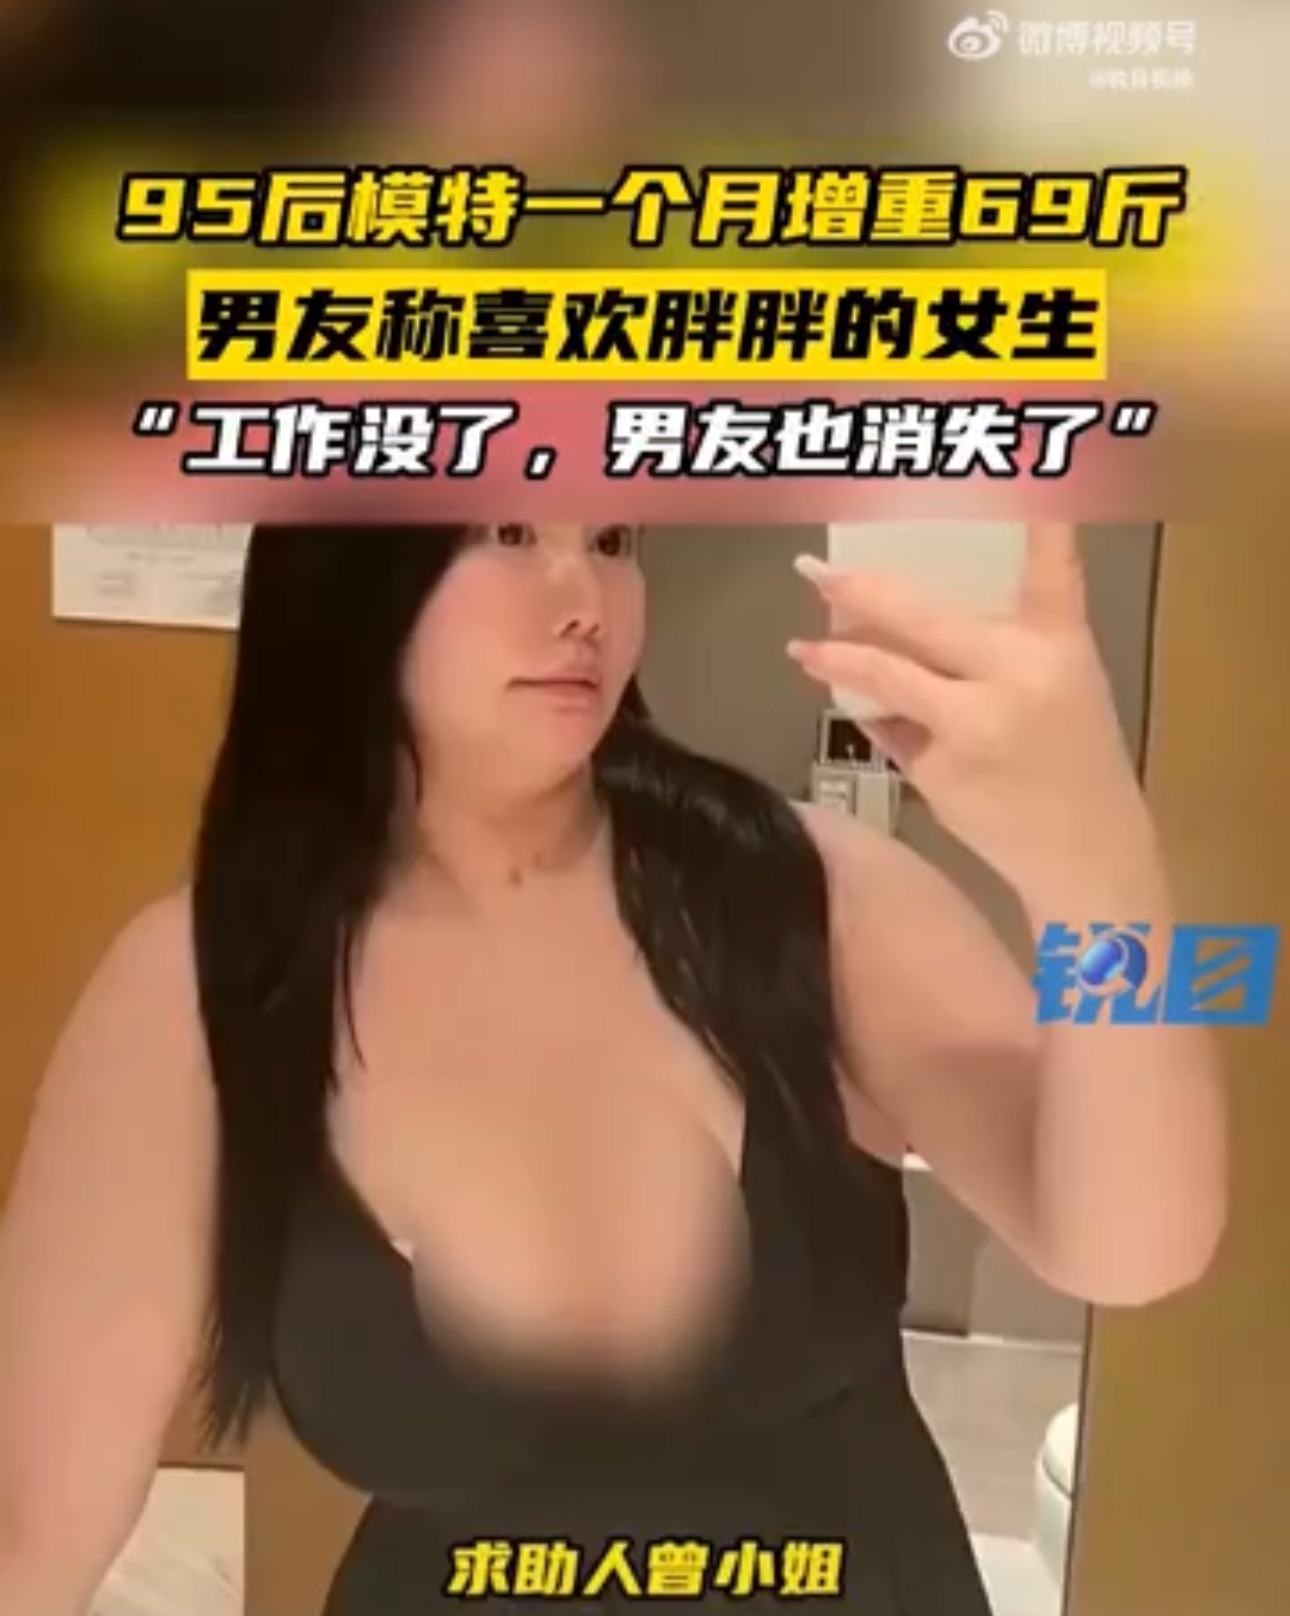 China model gains 35kg after bf says he prefers chubbier women but gets dumped in the end | weirdkaya